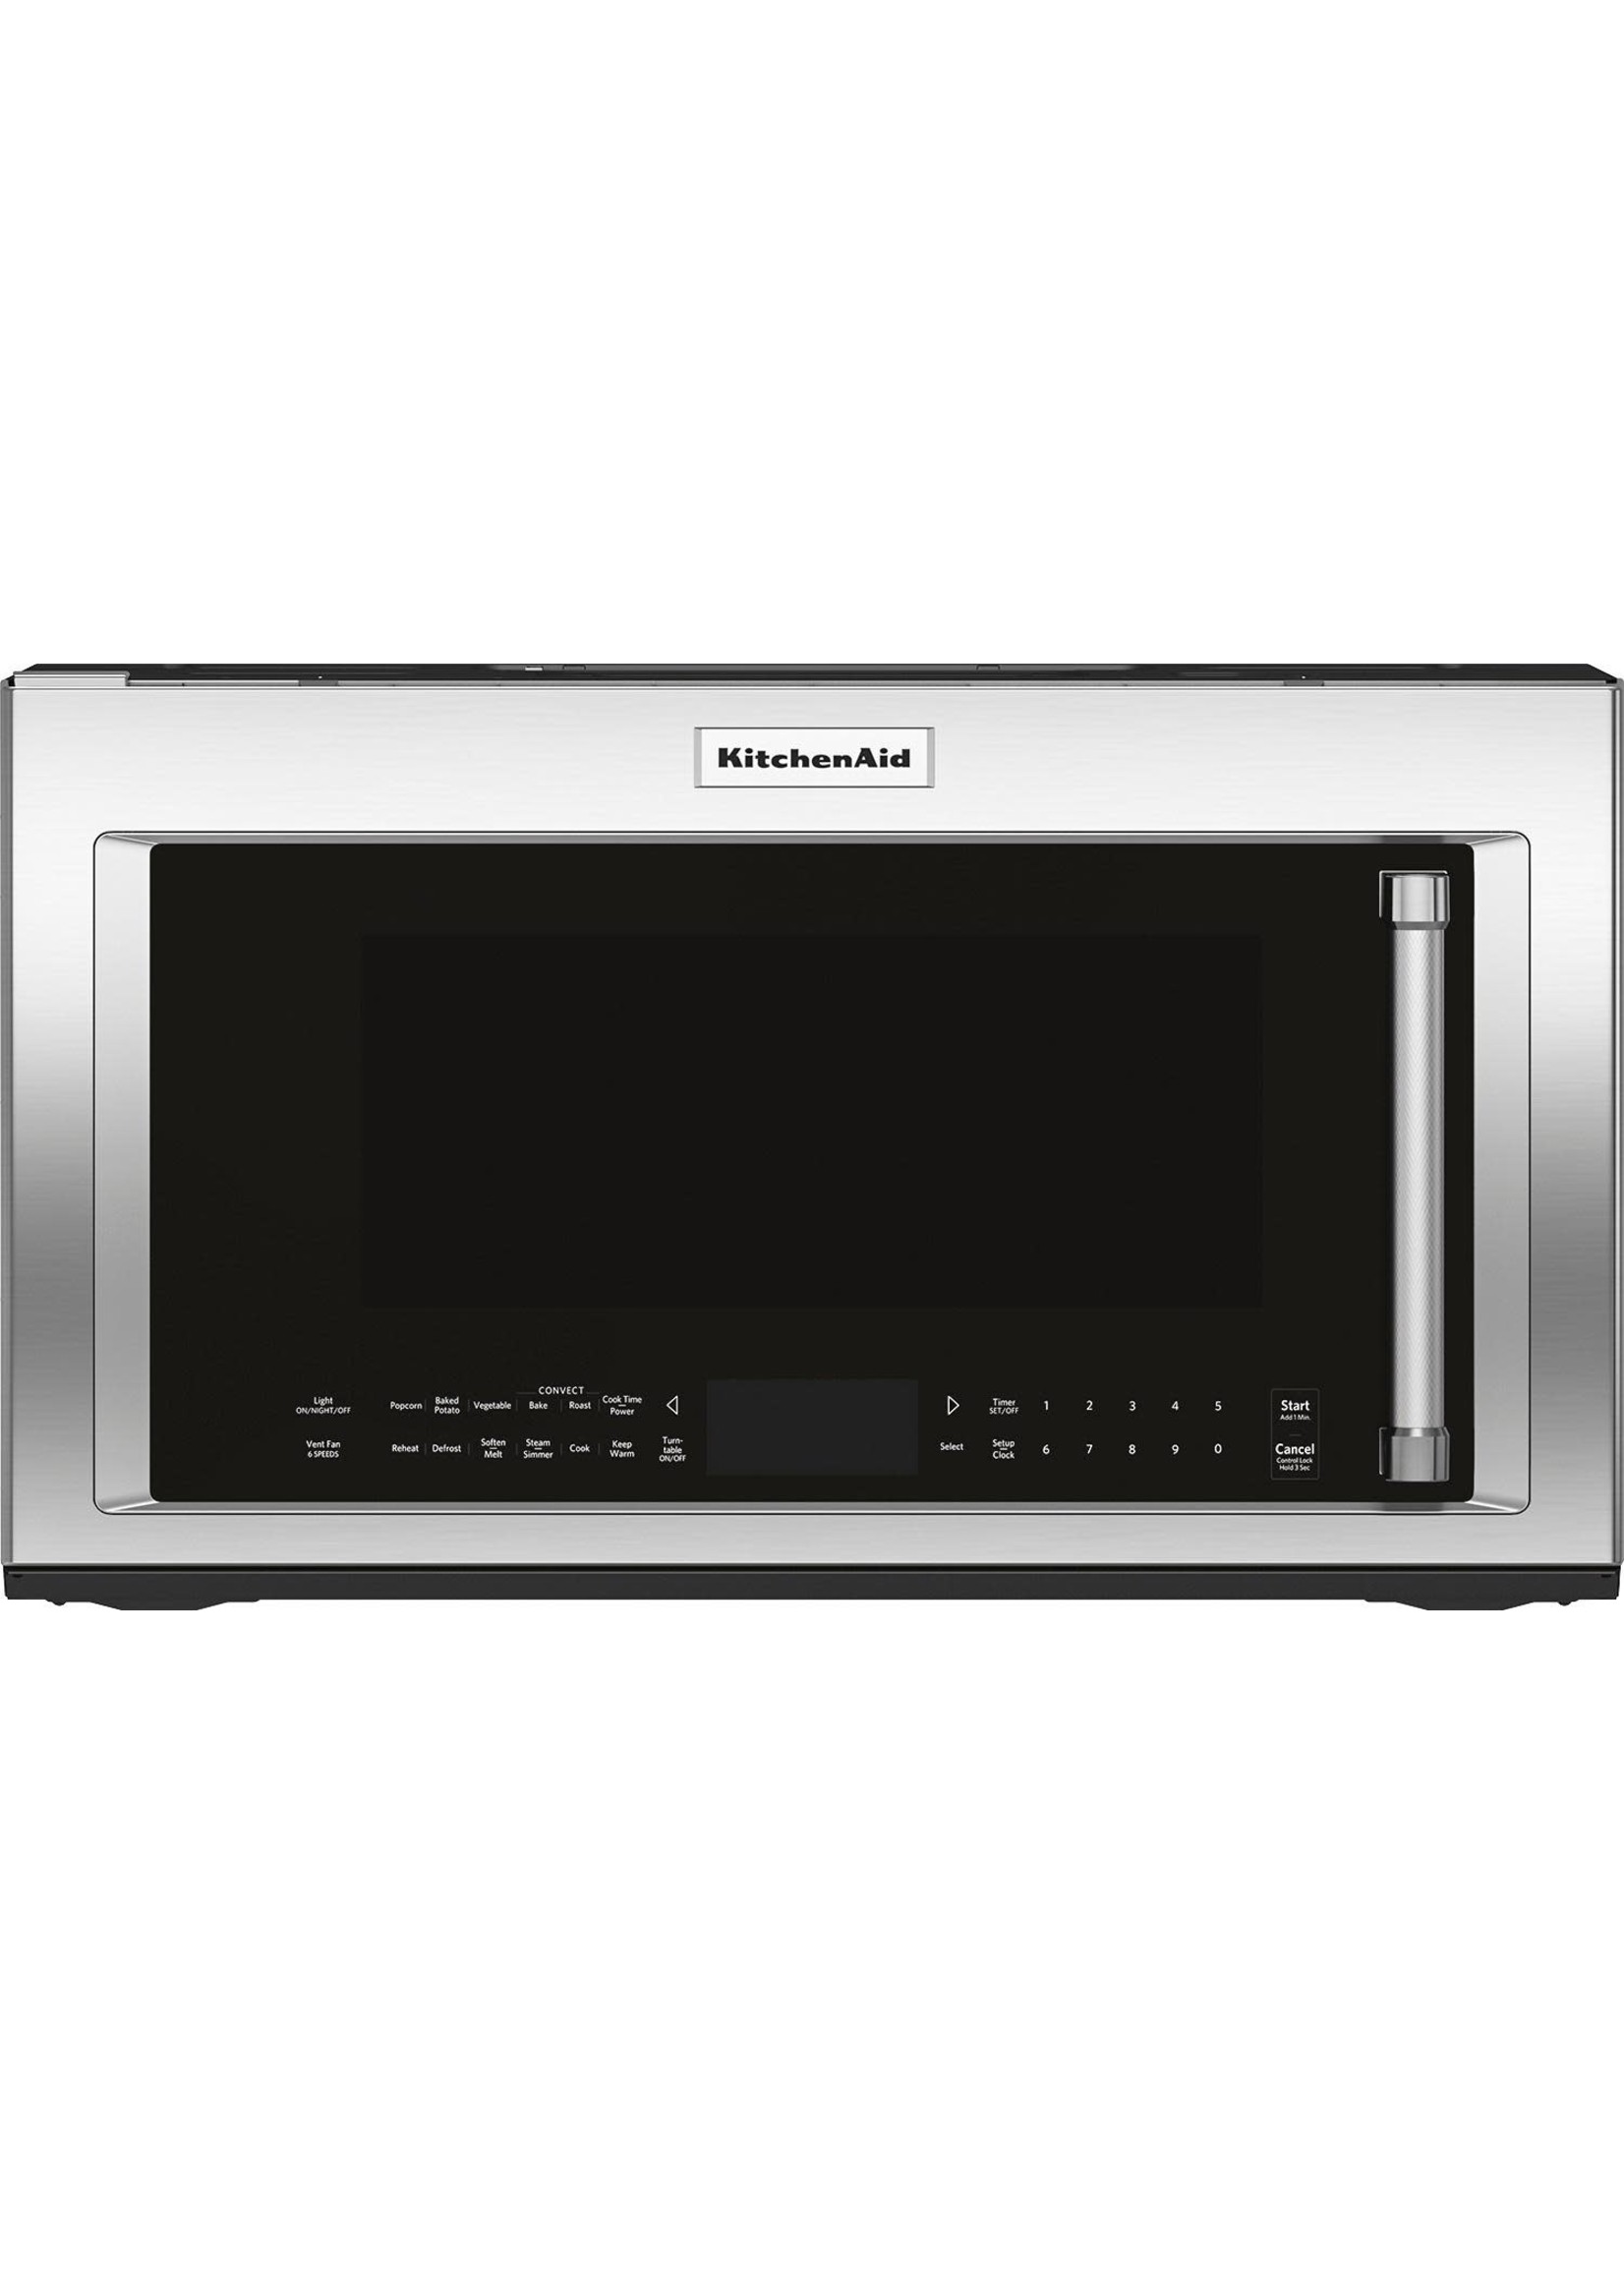 KITCHEN AID KitchenAid 1.9 cu. ft. Over the Range Convection Microwave in Stainless Steel with Sensor Cooking Technology